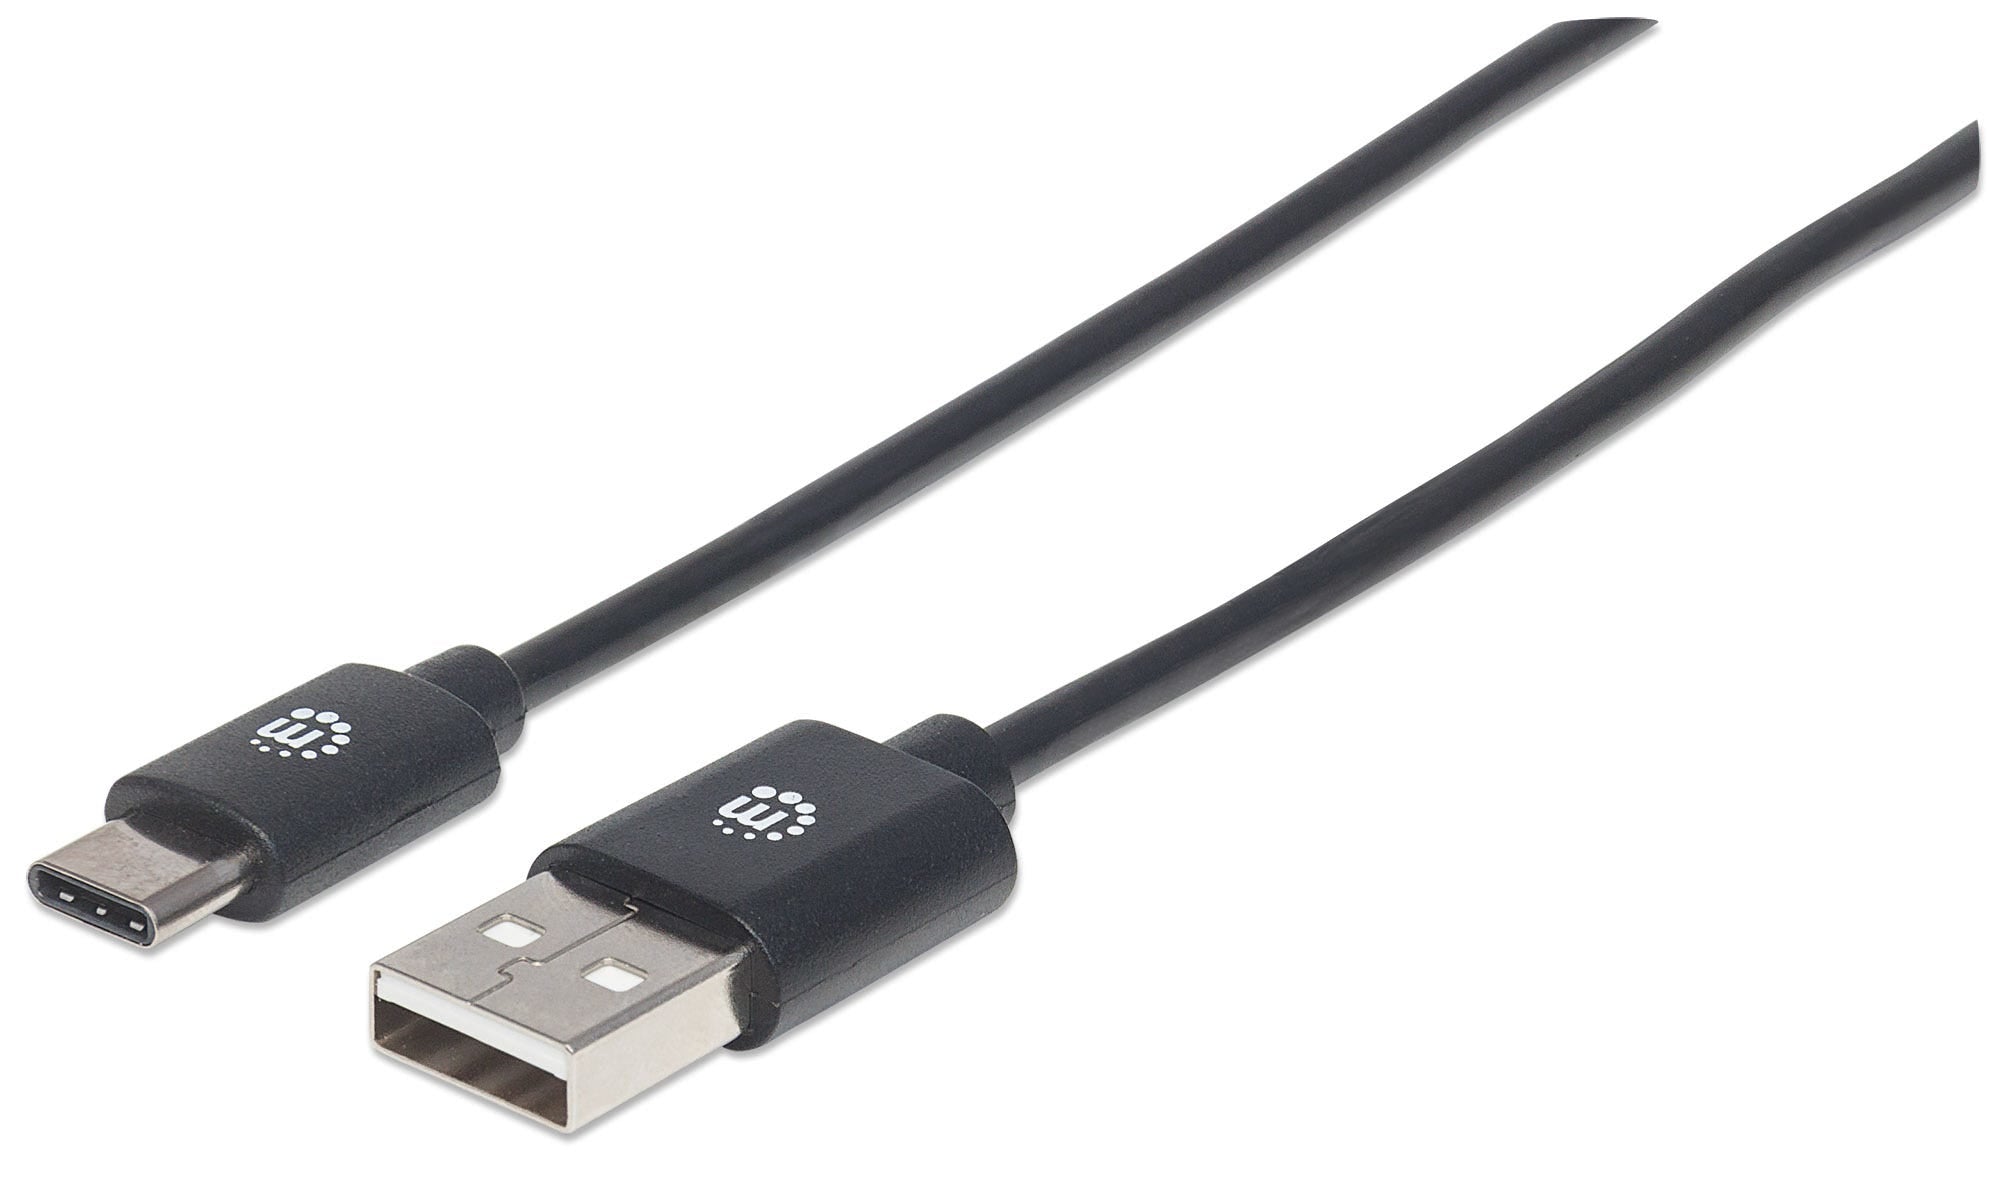 Manhattan USB-C to USB-A Cable, 3m, Male to Male, 480 Mbps (USB 2.0), Hi-Speed USB, Black, Lifetime Warranty, Polybag